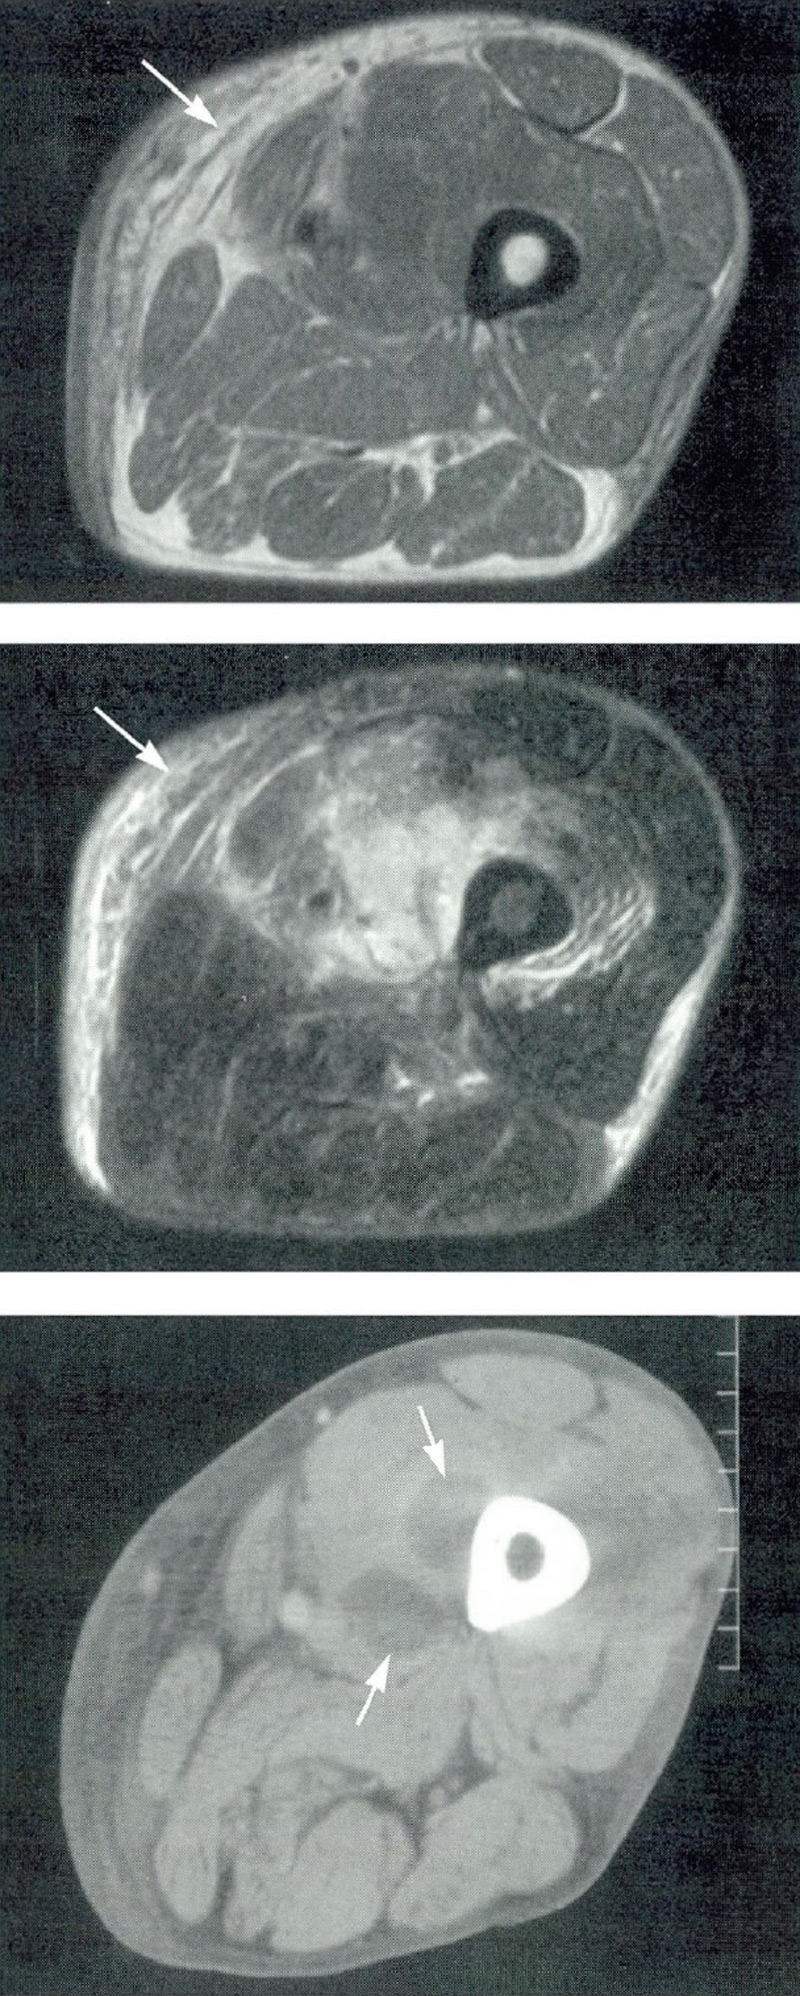 MRI images (top two images) show inflammation in thigh tissue. The CT scan (bottom image) shows an abscess (pyomyositis) that formed near the thigh bone (femur).